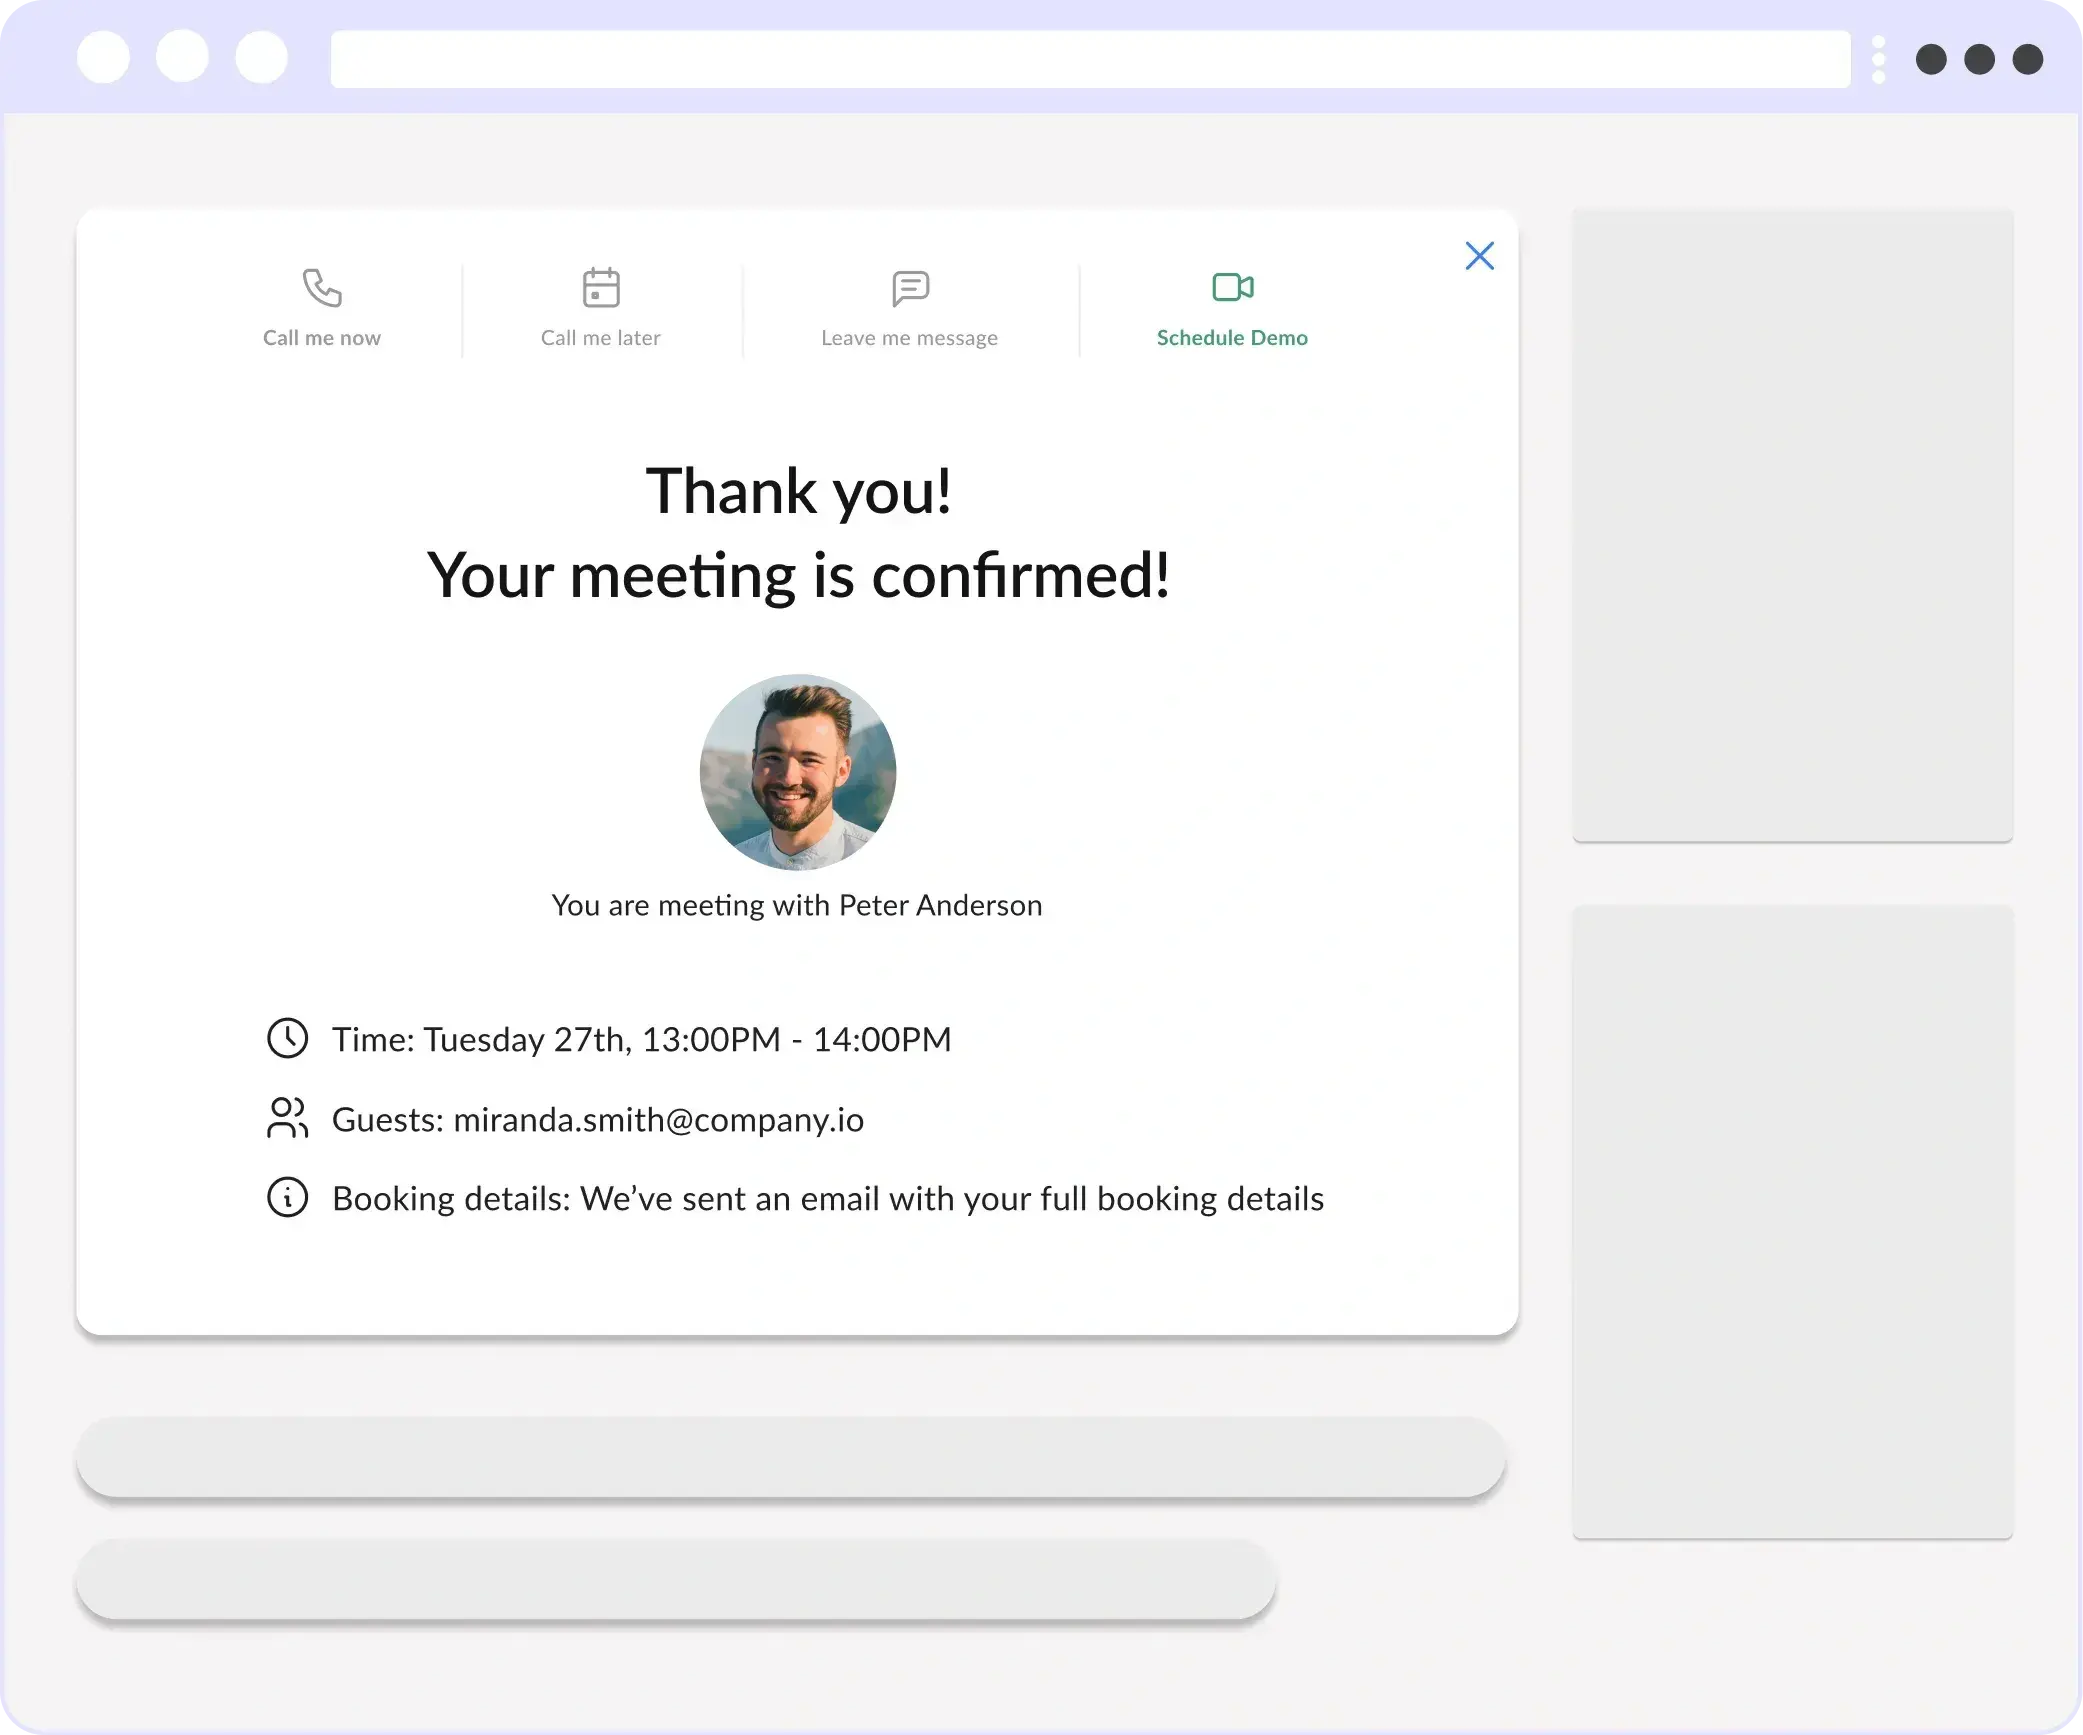 Meeting scheduling form embedded on a landing page